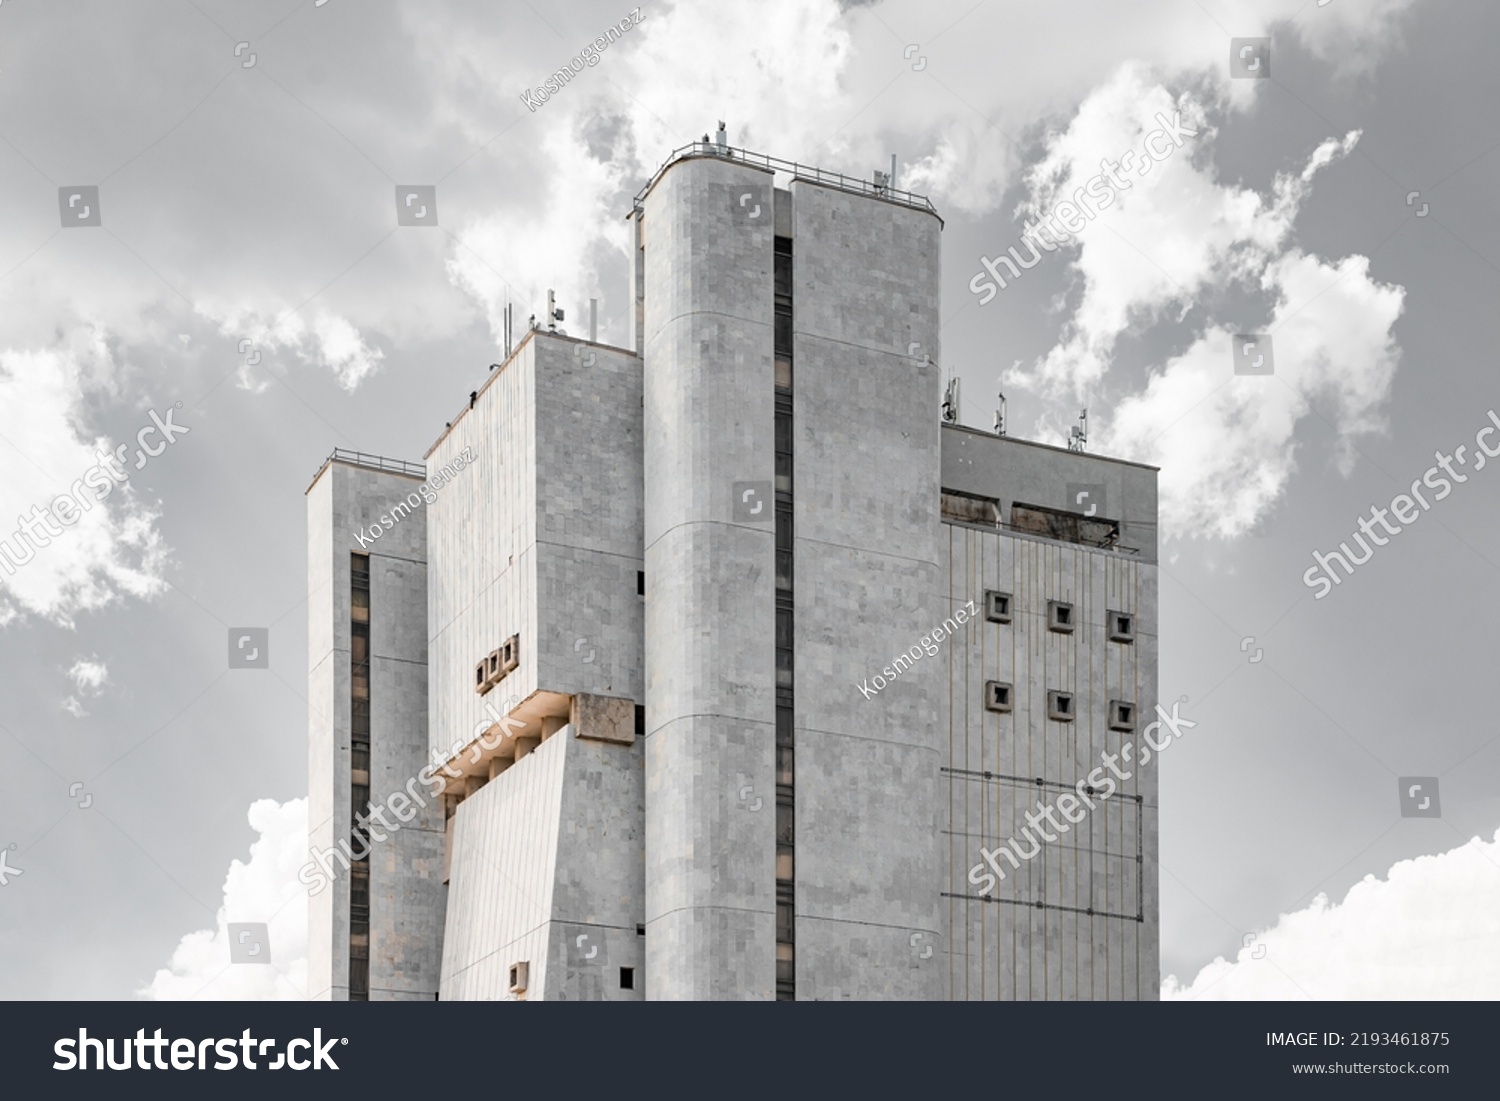 Soviet Brutalist Architecture. High gray walls with small windows. Old Soviet building #2193461875